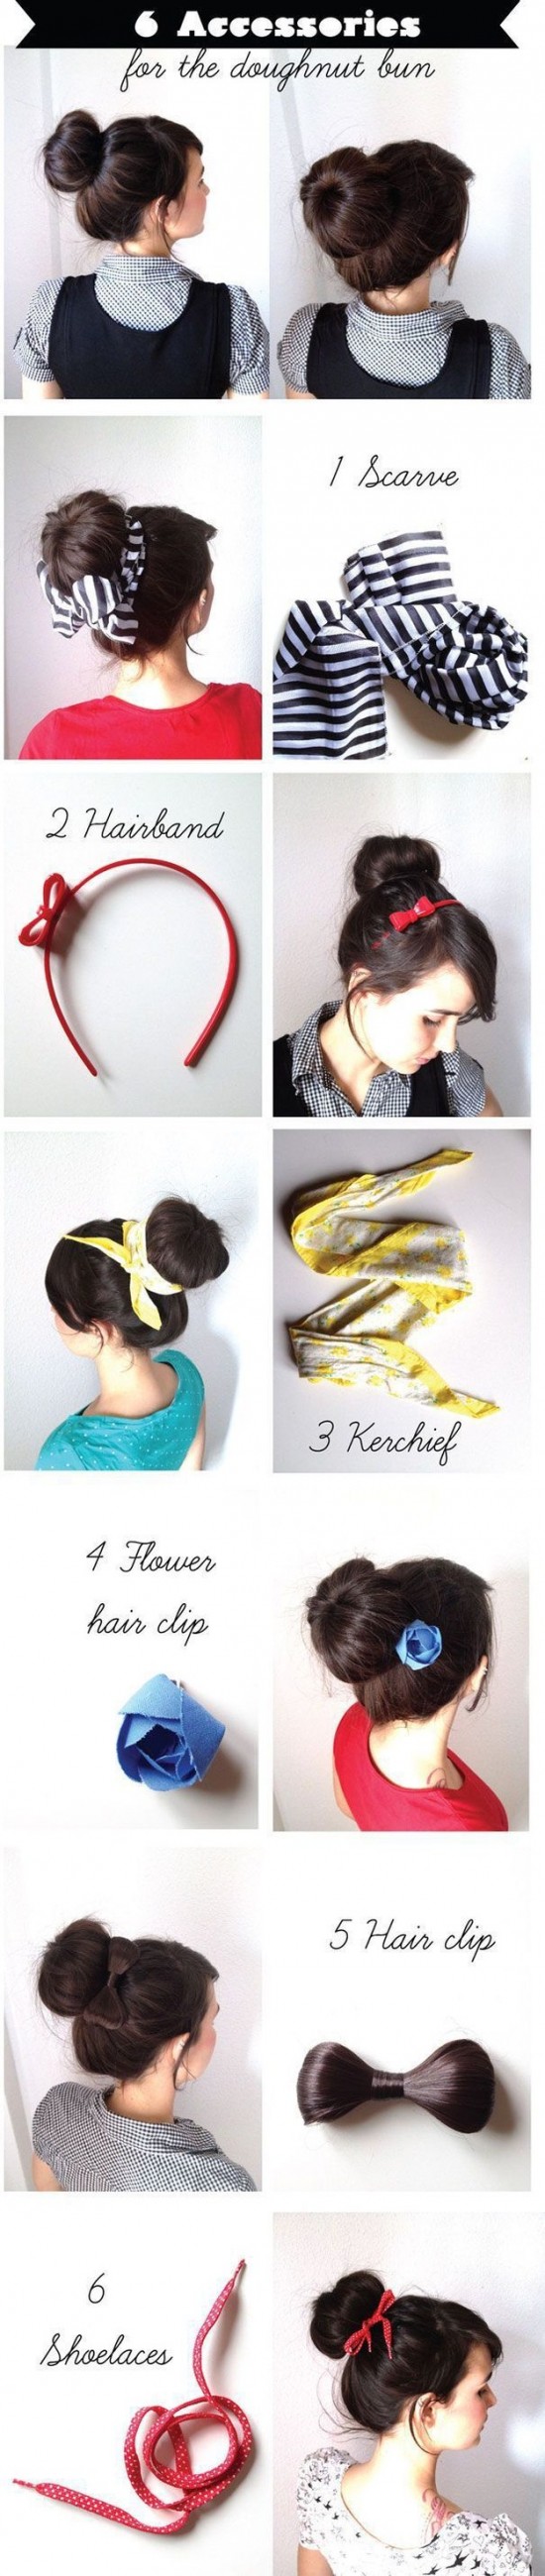 Creative-Hairstyles-That-You-Can-Easily-Do-at-Home-012